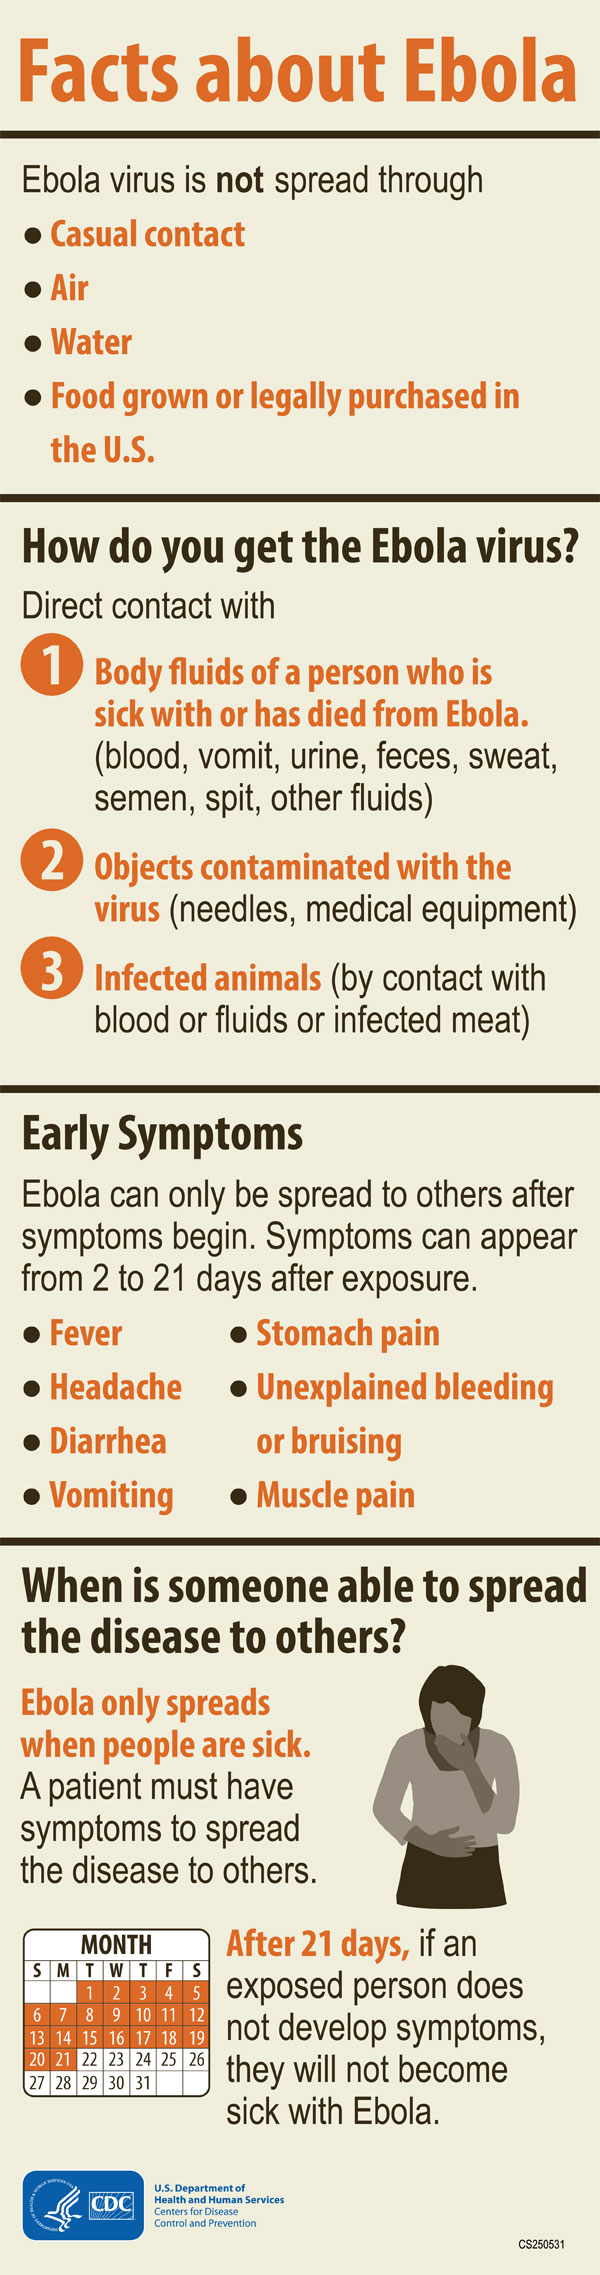 Facts About Ebola Infographic-a visual compilation outlining the information presented on this page.